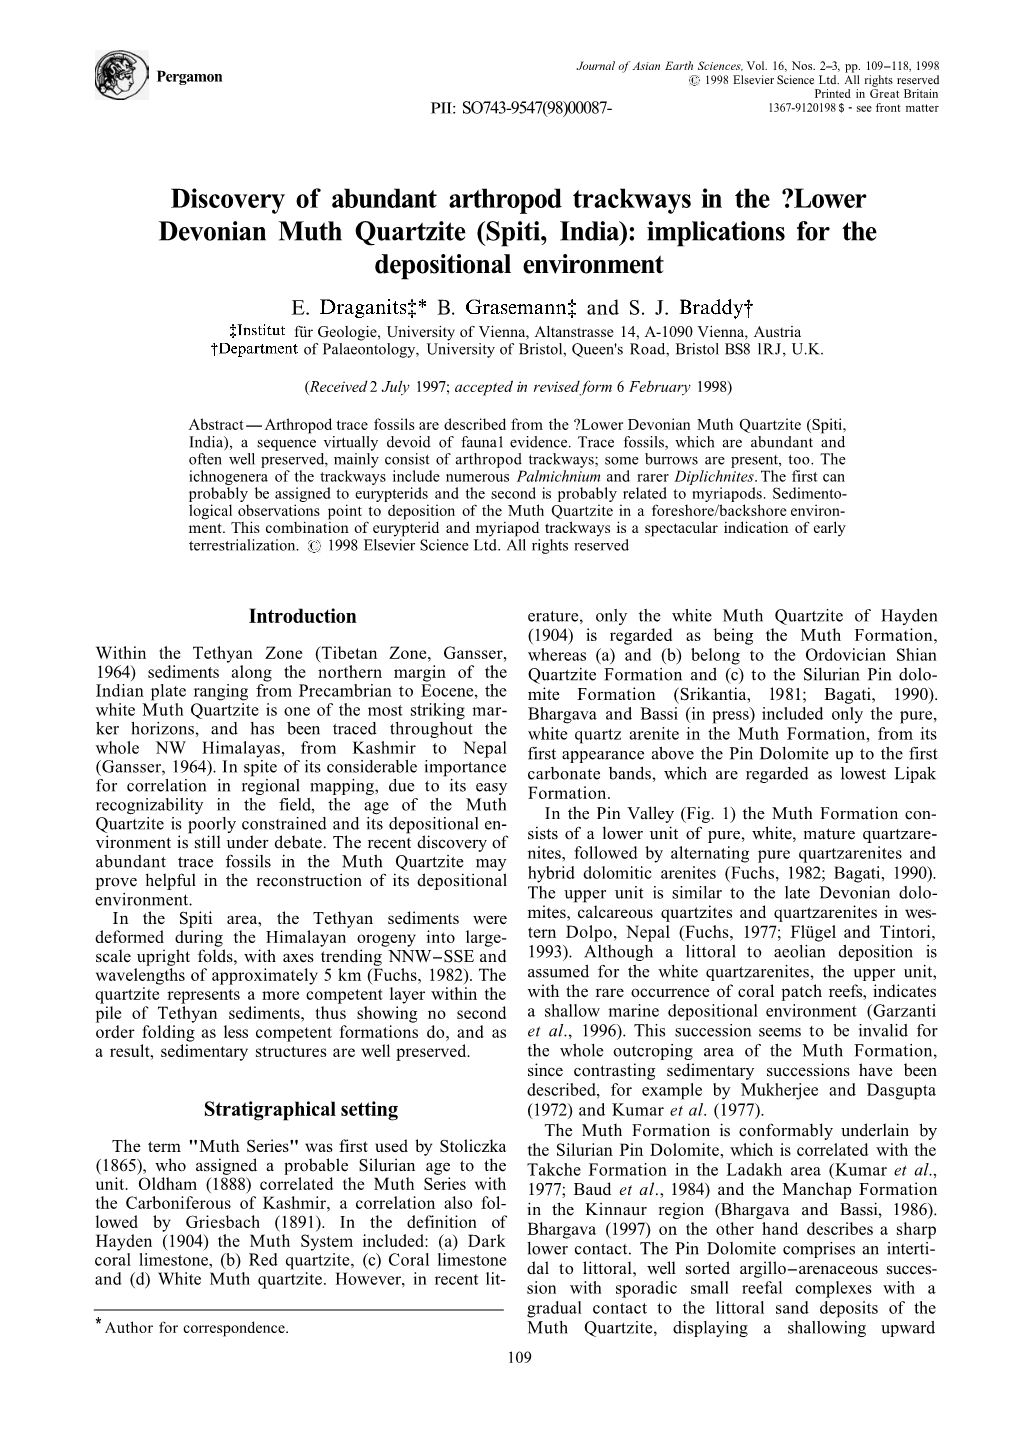 Lower Devonian Muth Quartzite (Spiti, India): Implications for the Depositional Environment E